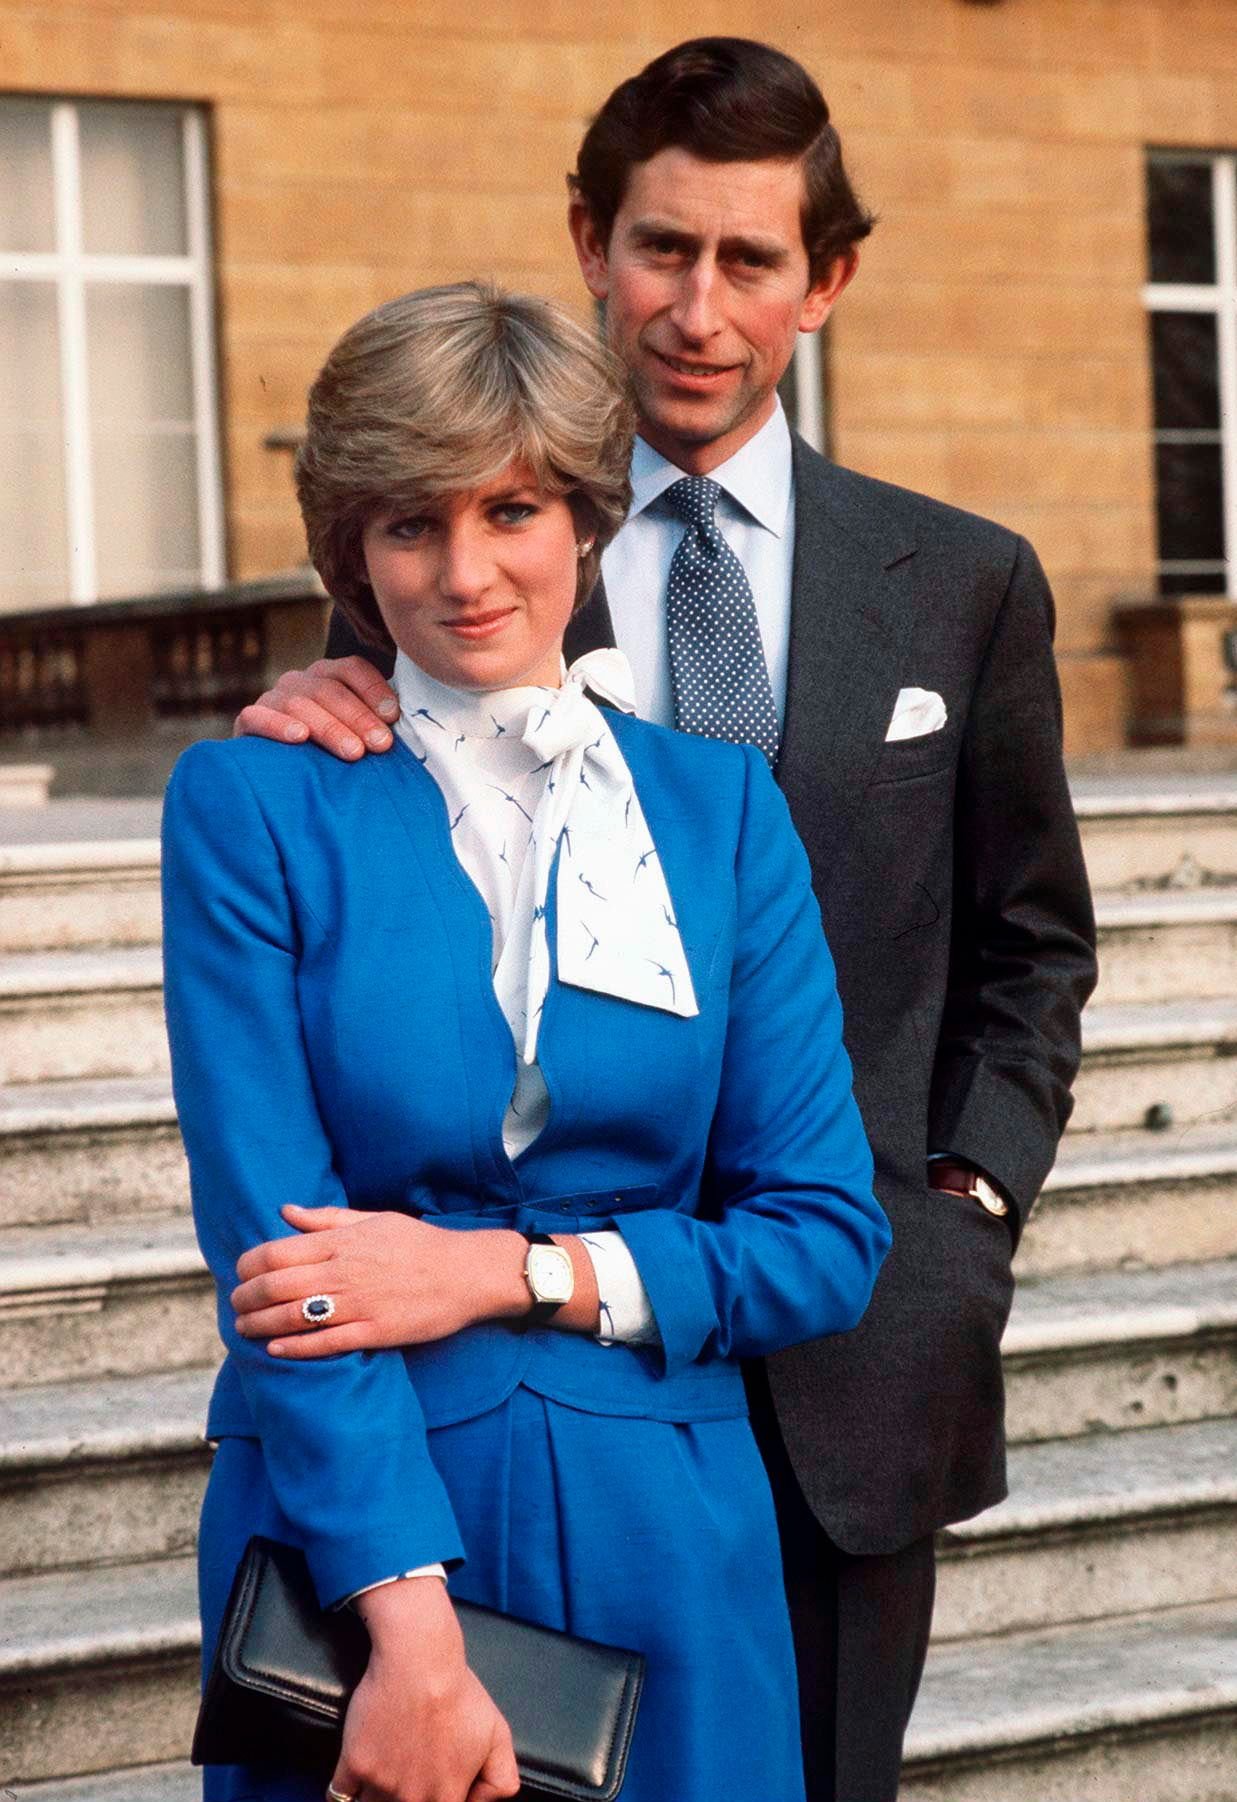  Lady Diana Spencer et le prince Charles. | Photo : Getty Images